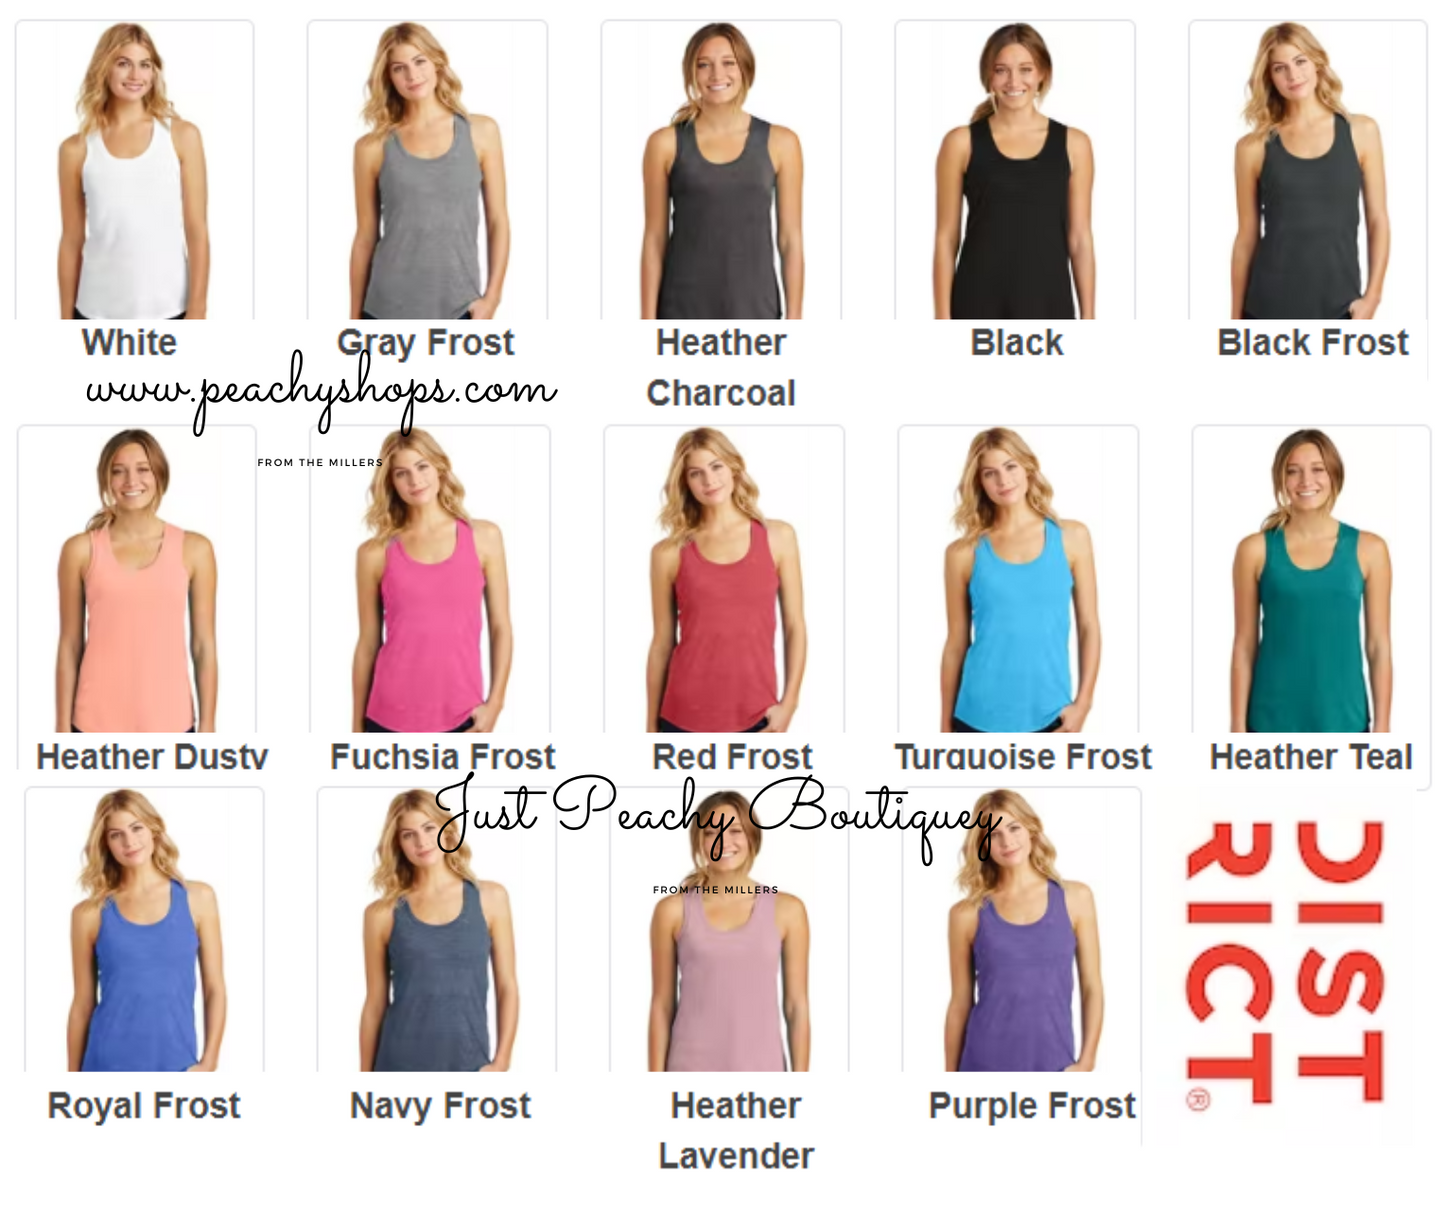 DEAR WEARY ONE WITH MATCHING POCKET T-SHIRT OR PICK FROM 200 COLOR & STYLE OPTIONS! - TAT 4-7 DAYS